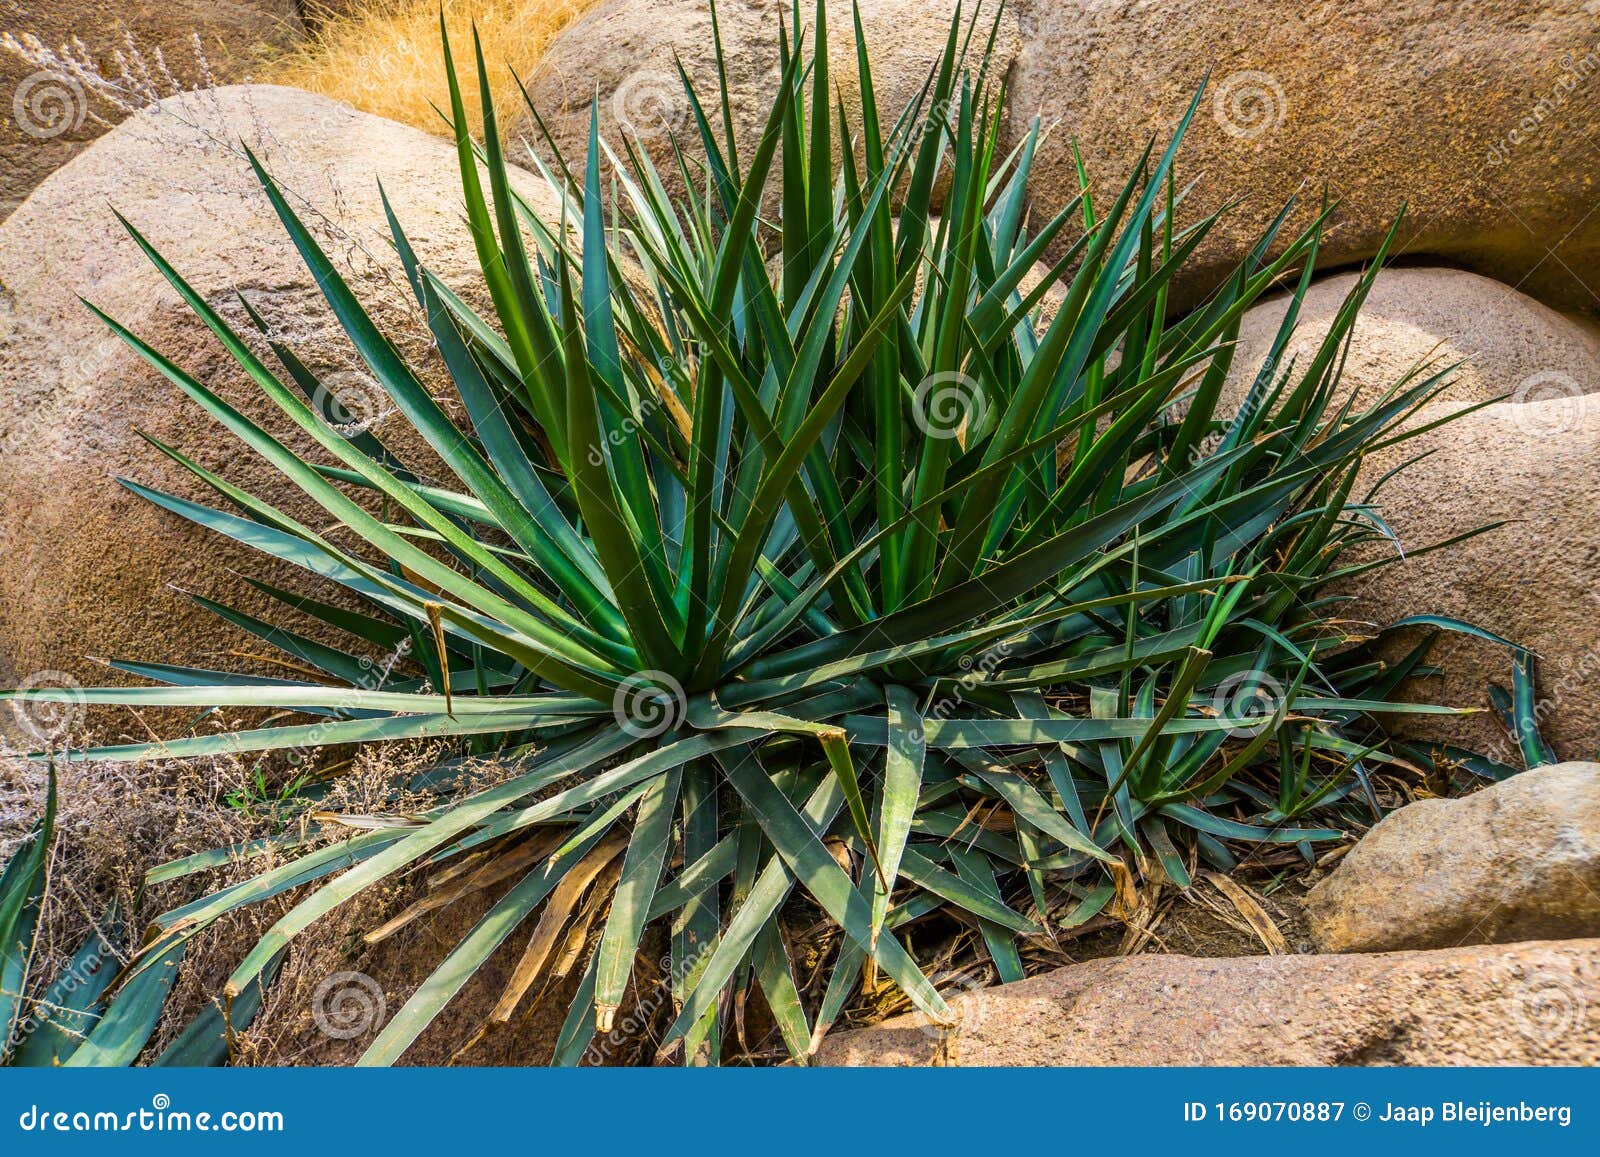 Agave Sisalana Plant in Closeup, Known As Sisal in Mexico, Popular Tropical  Plant Specie Stock Image - Image of botanic, asian: 169070887